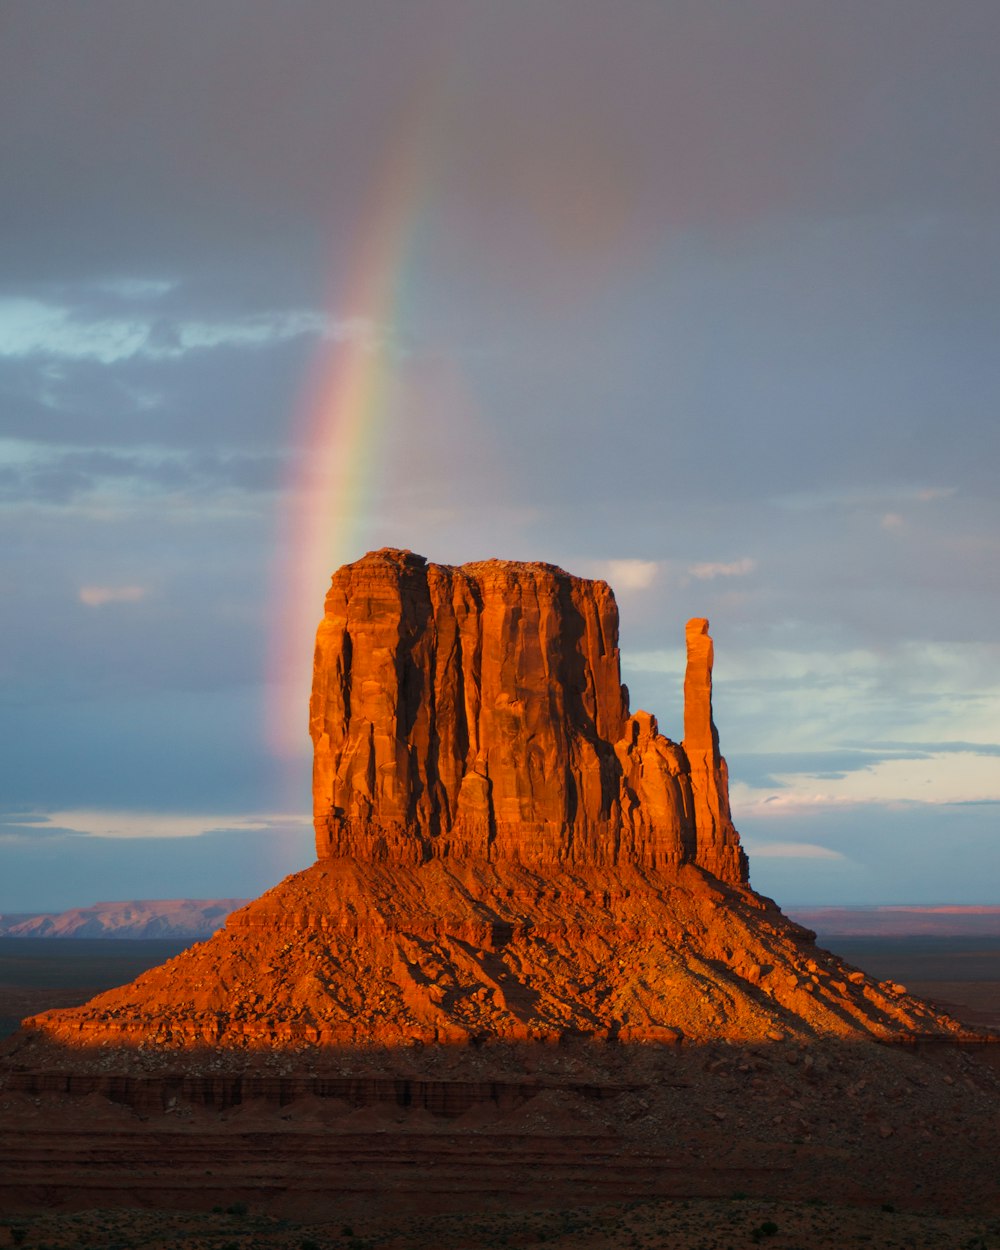 Rainbow over rock formation during daytime